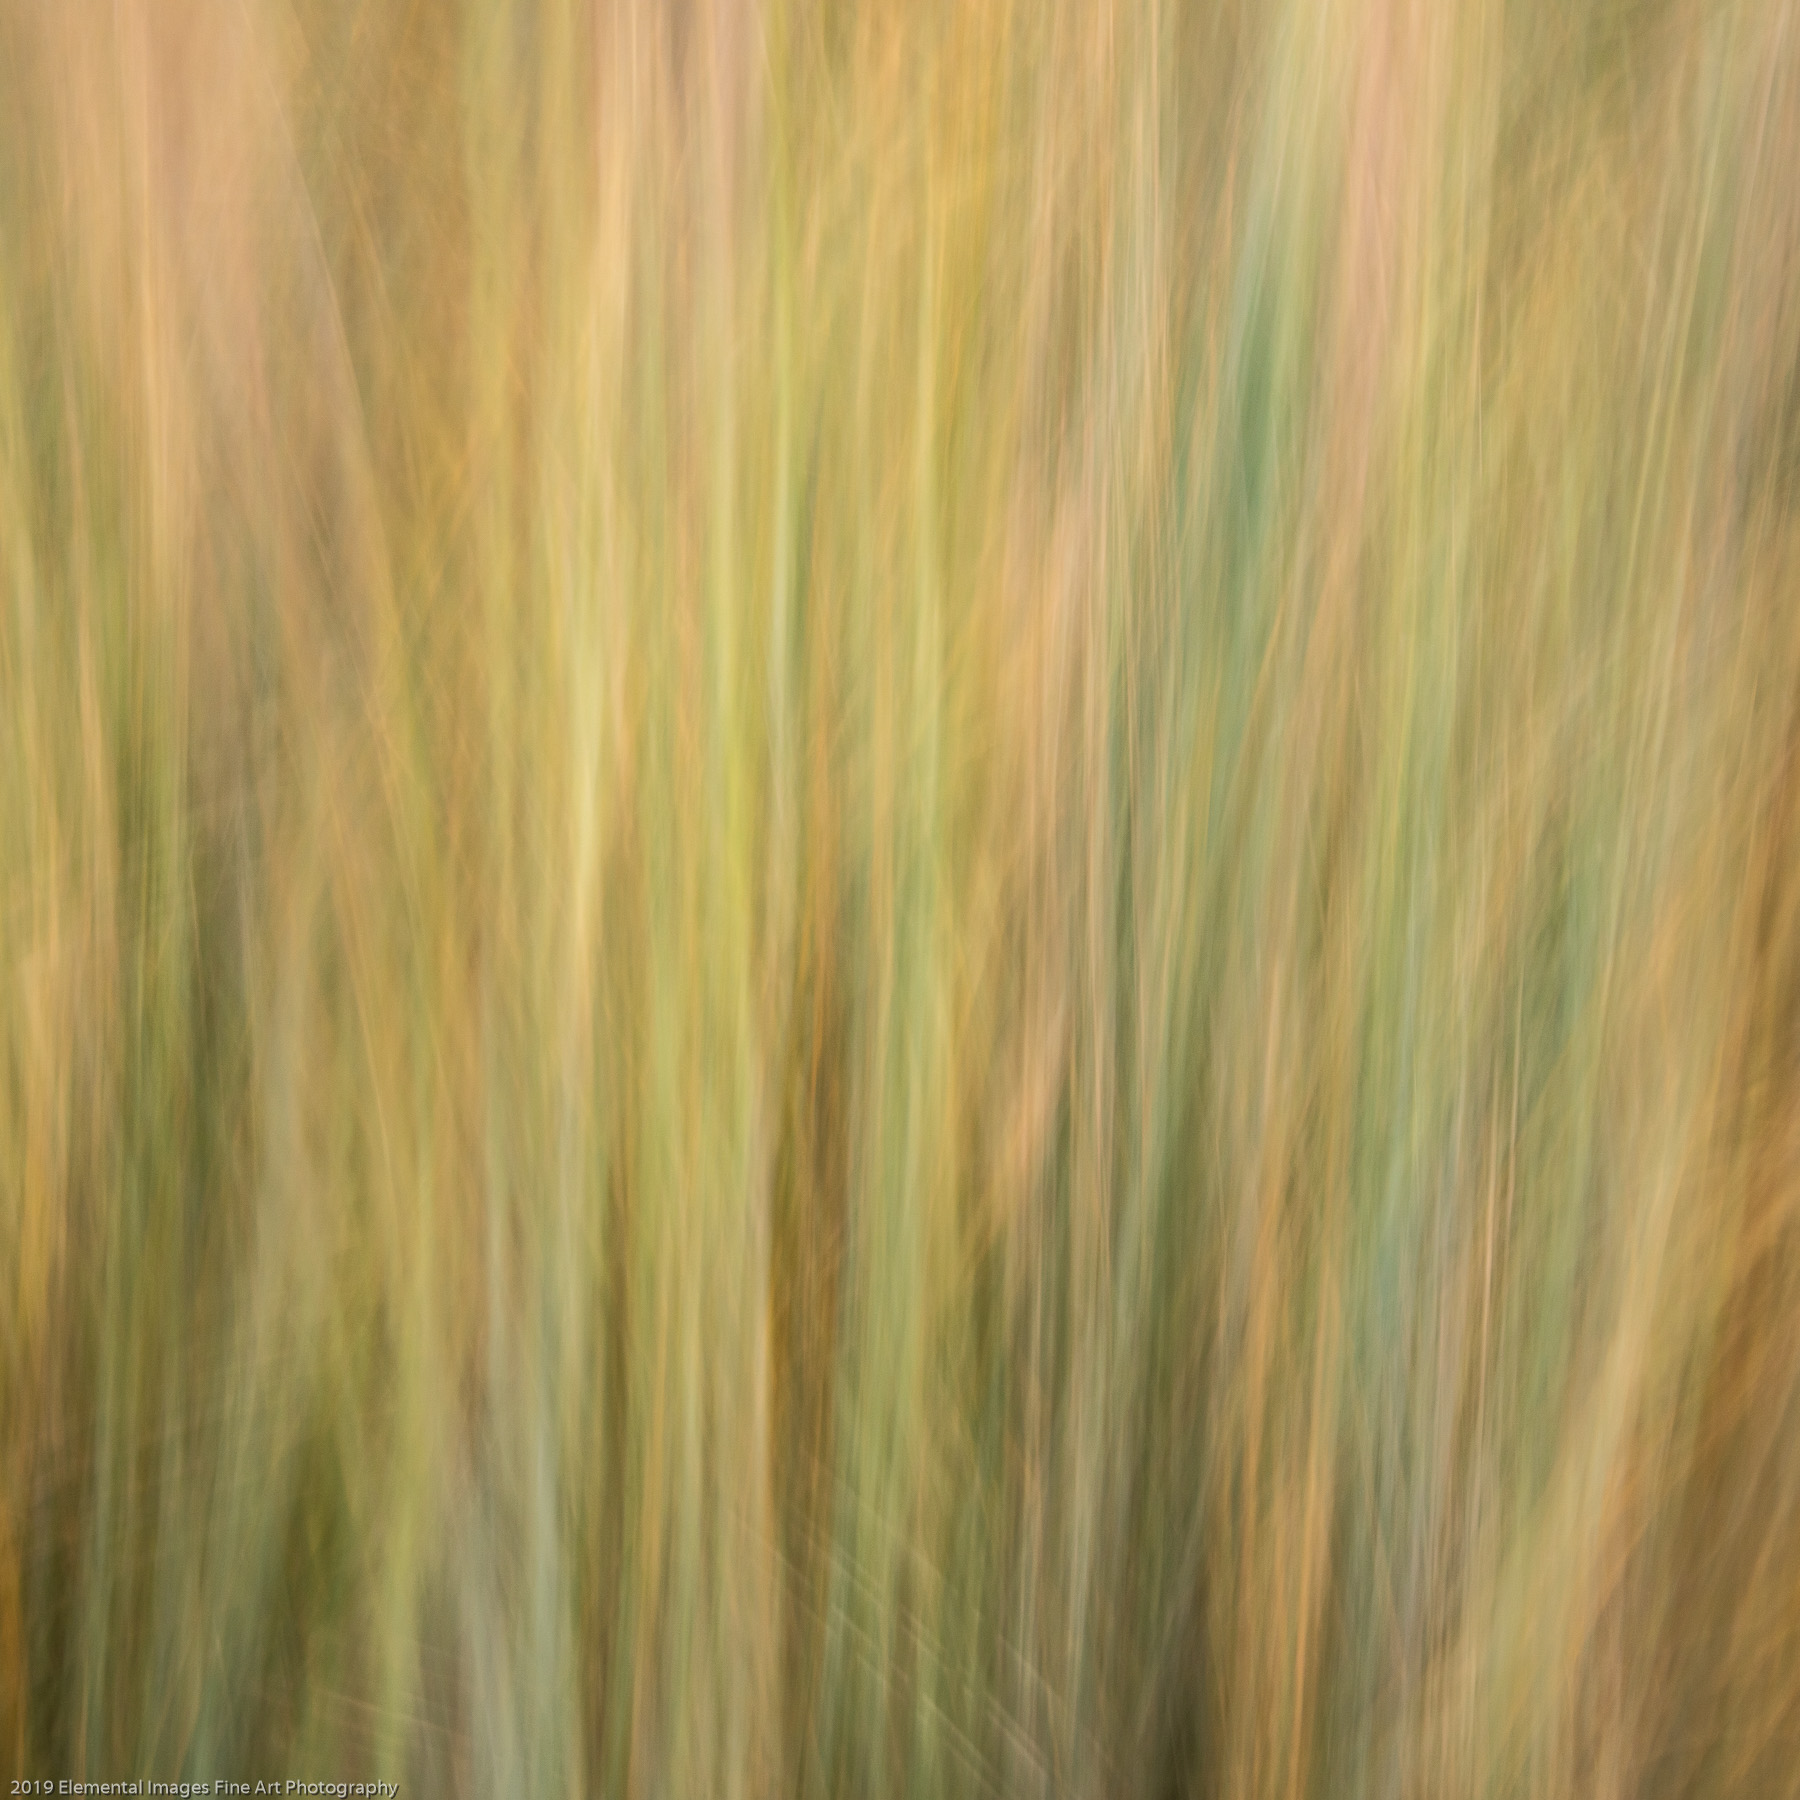 Grasses #174 |  | AK | USA - © 2019 Elemental Images Fine Art Photography - All Rights Reserved Worldwide